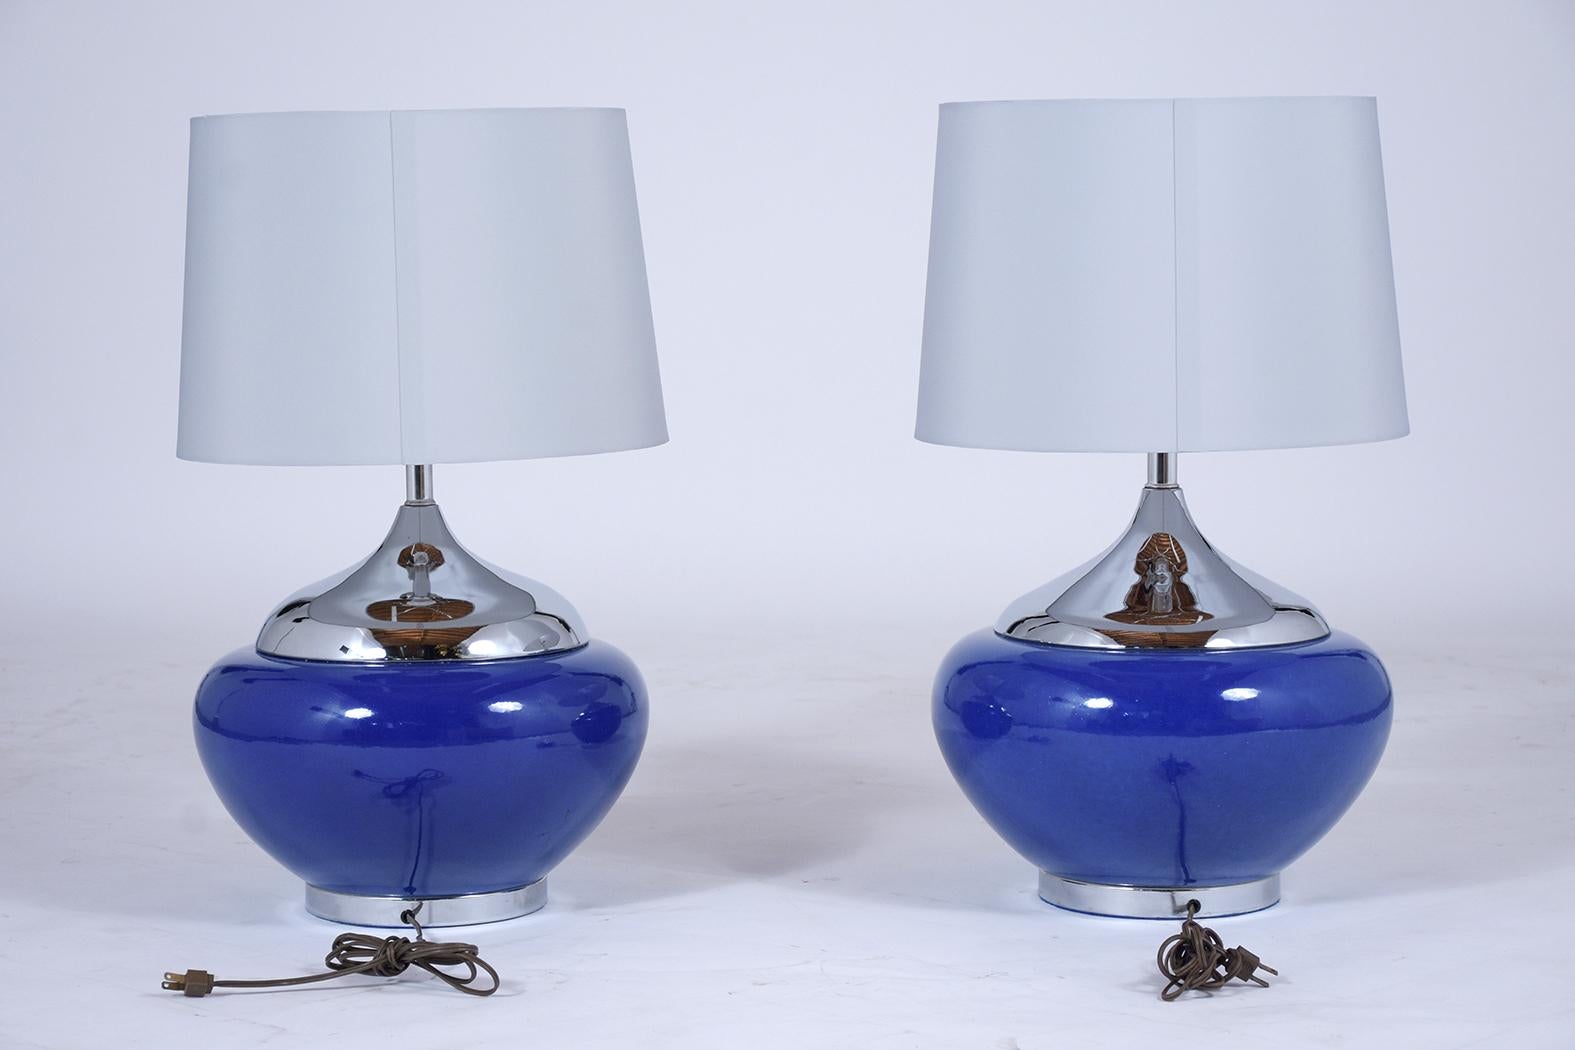 Late 20th Century Pair of Mid-Century Modern Blue Ceramic Table Lamps